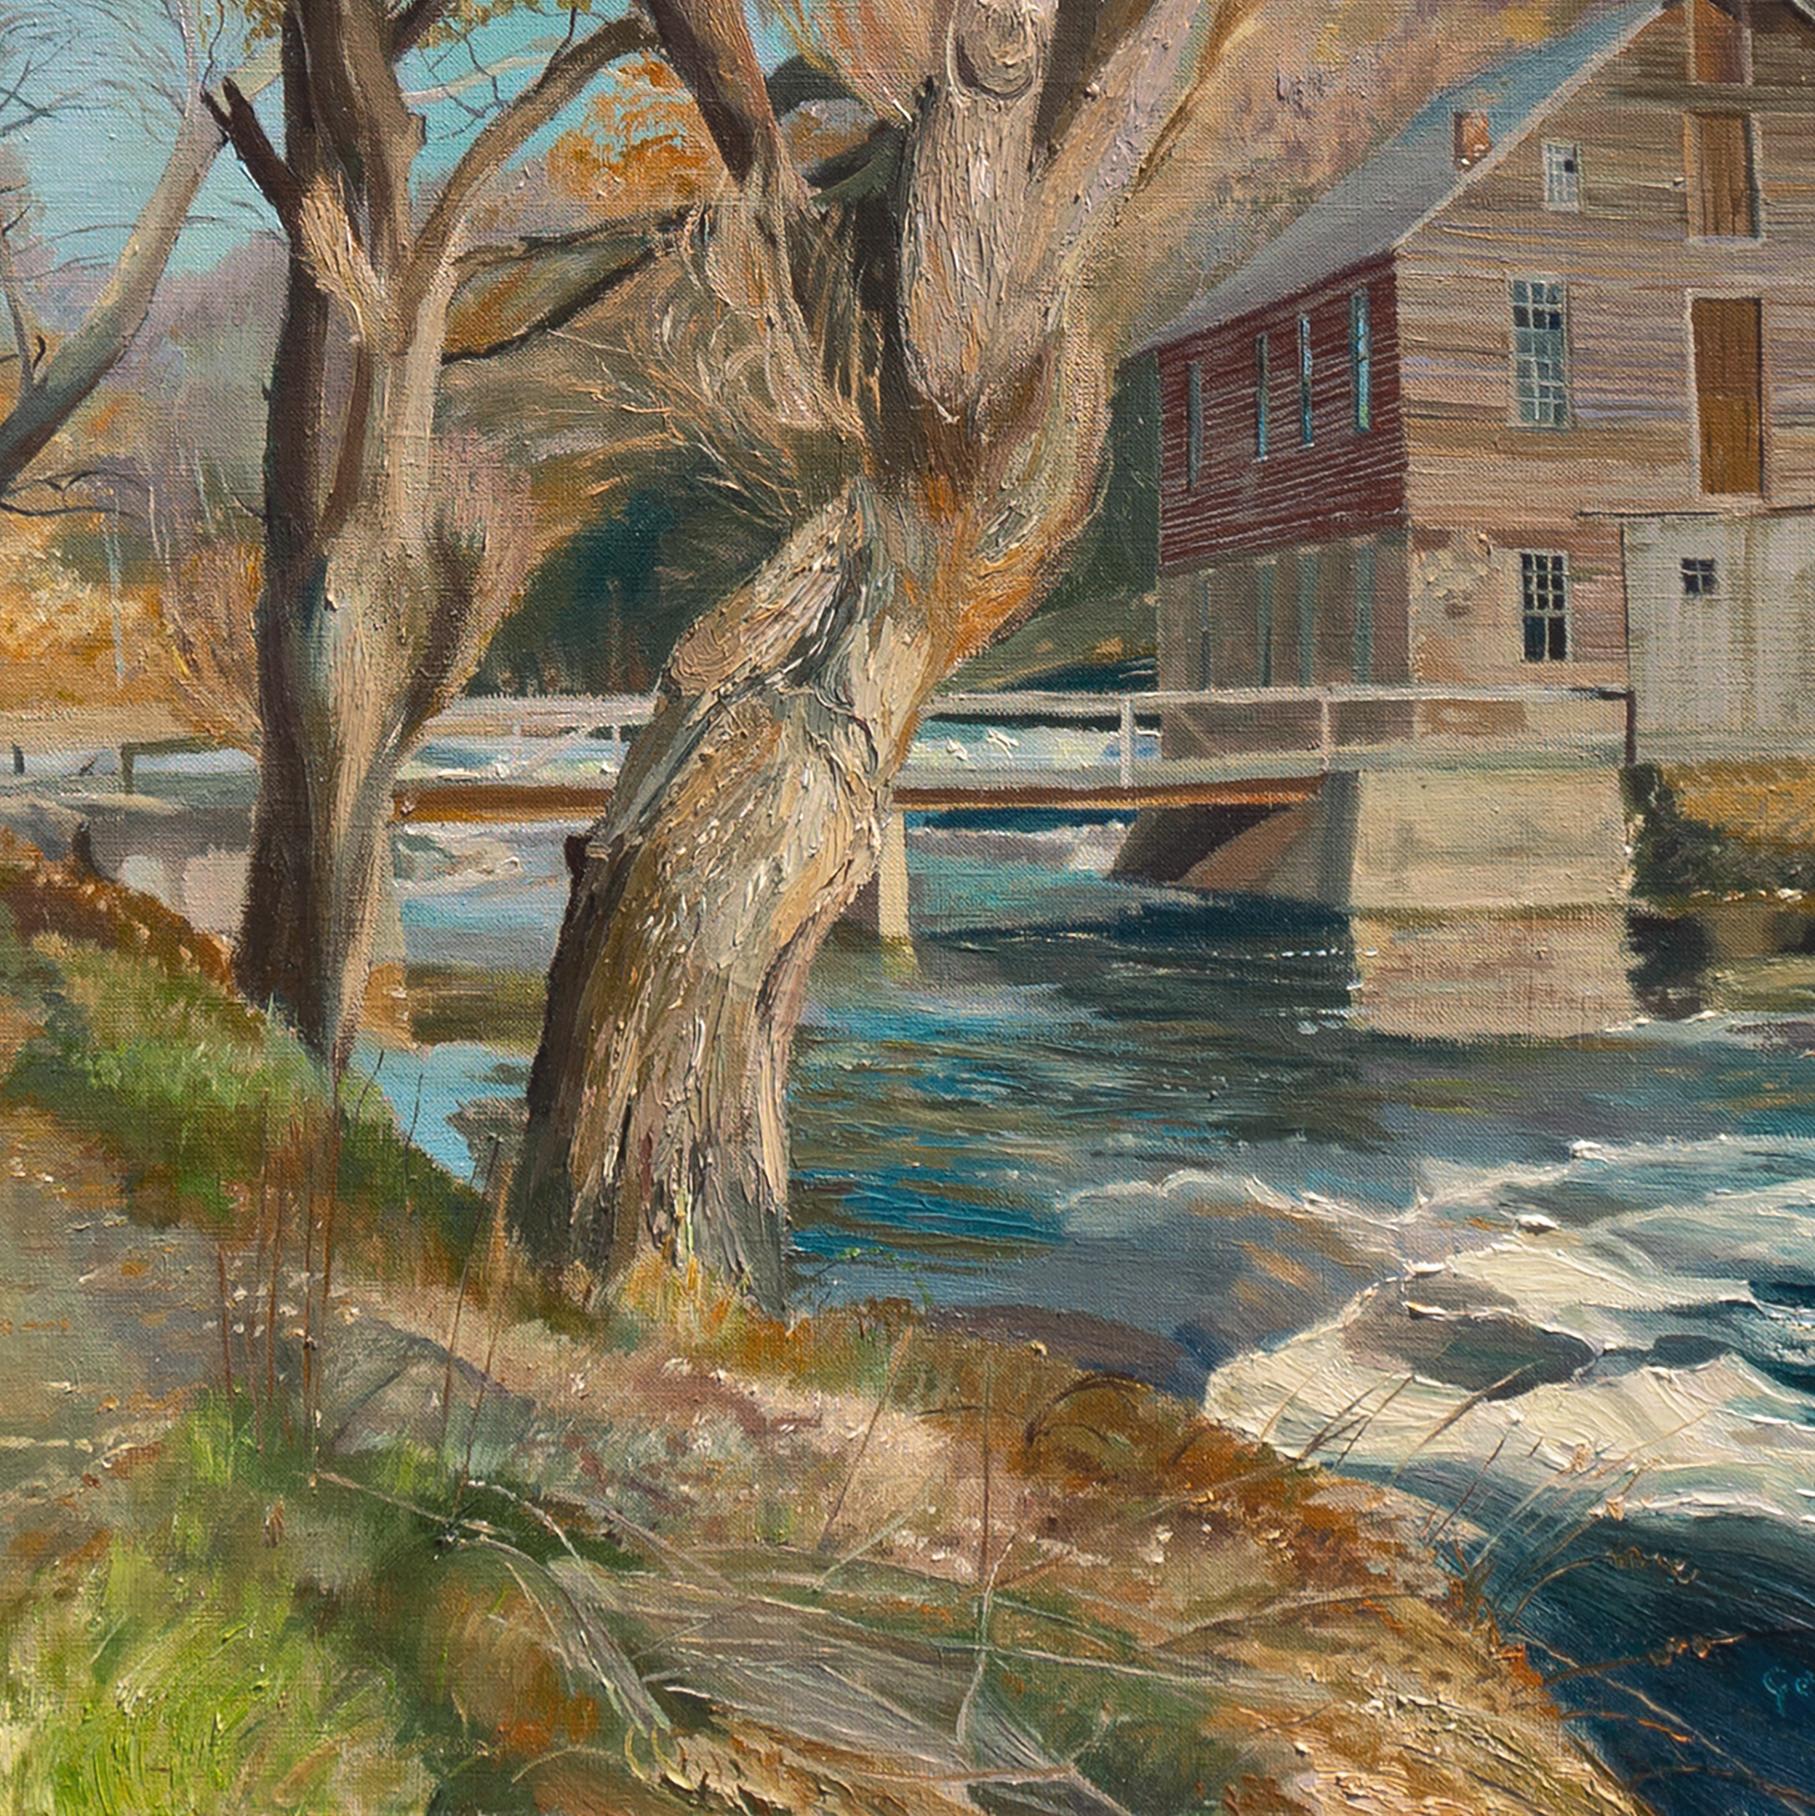 'Old Minisink Mill', Marshalls Creek, Silver Lake, PA, Doylestown Art League  - Painting by George Beidler, Jr.